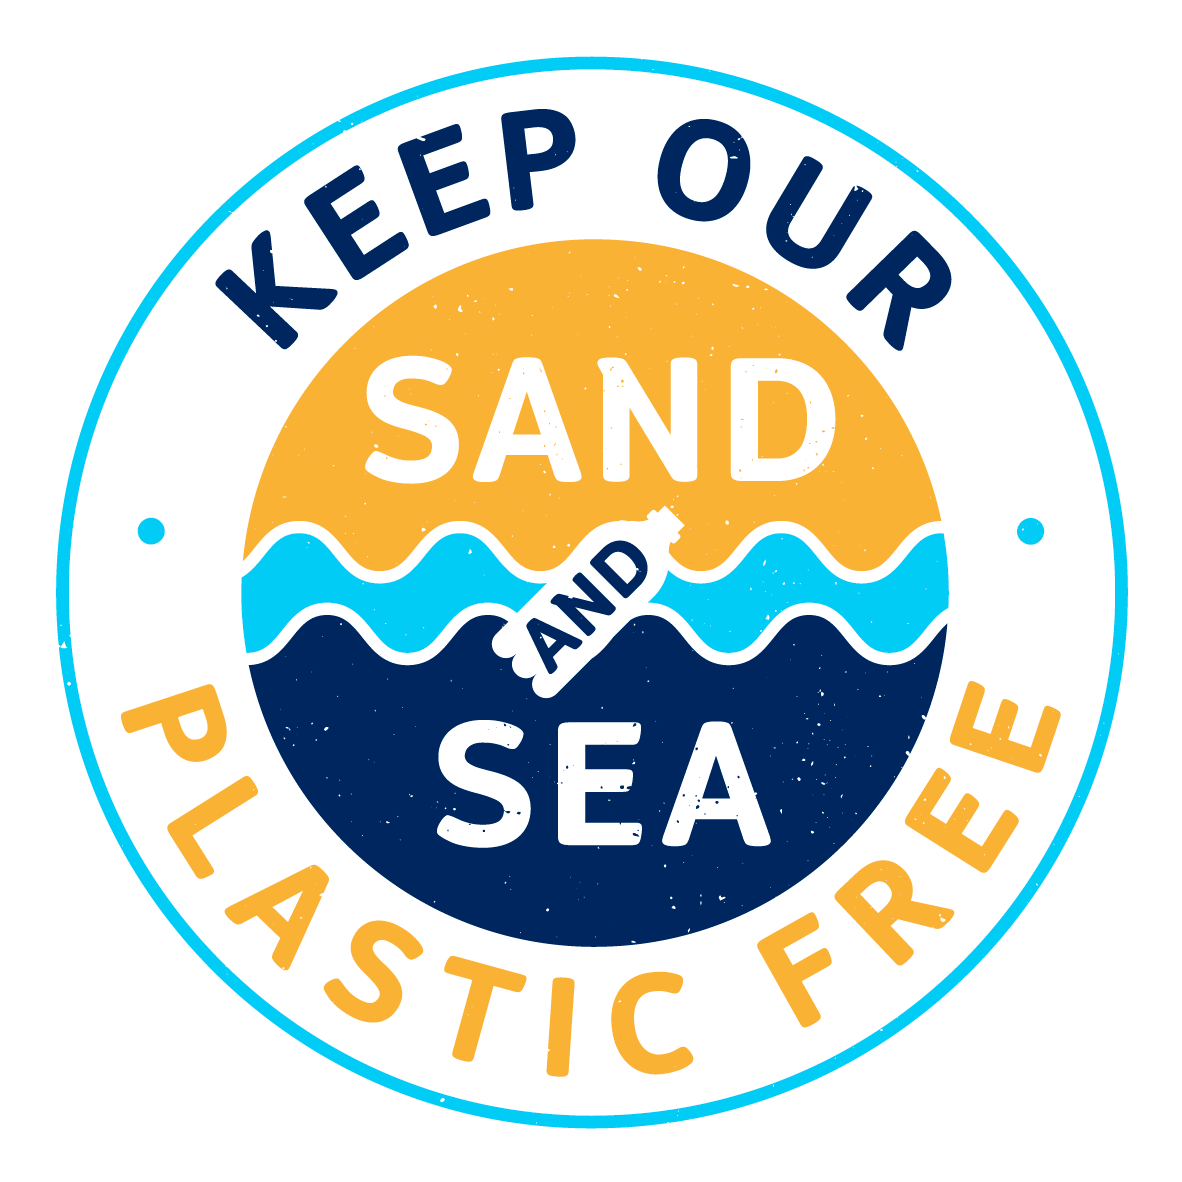 Keep our sand and sea plastic free